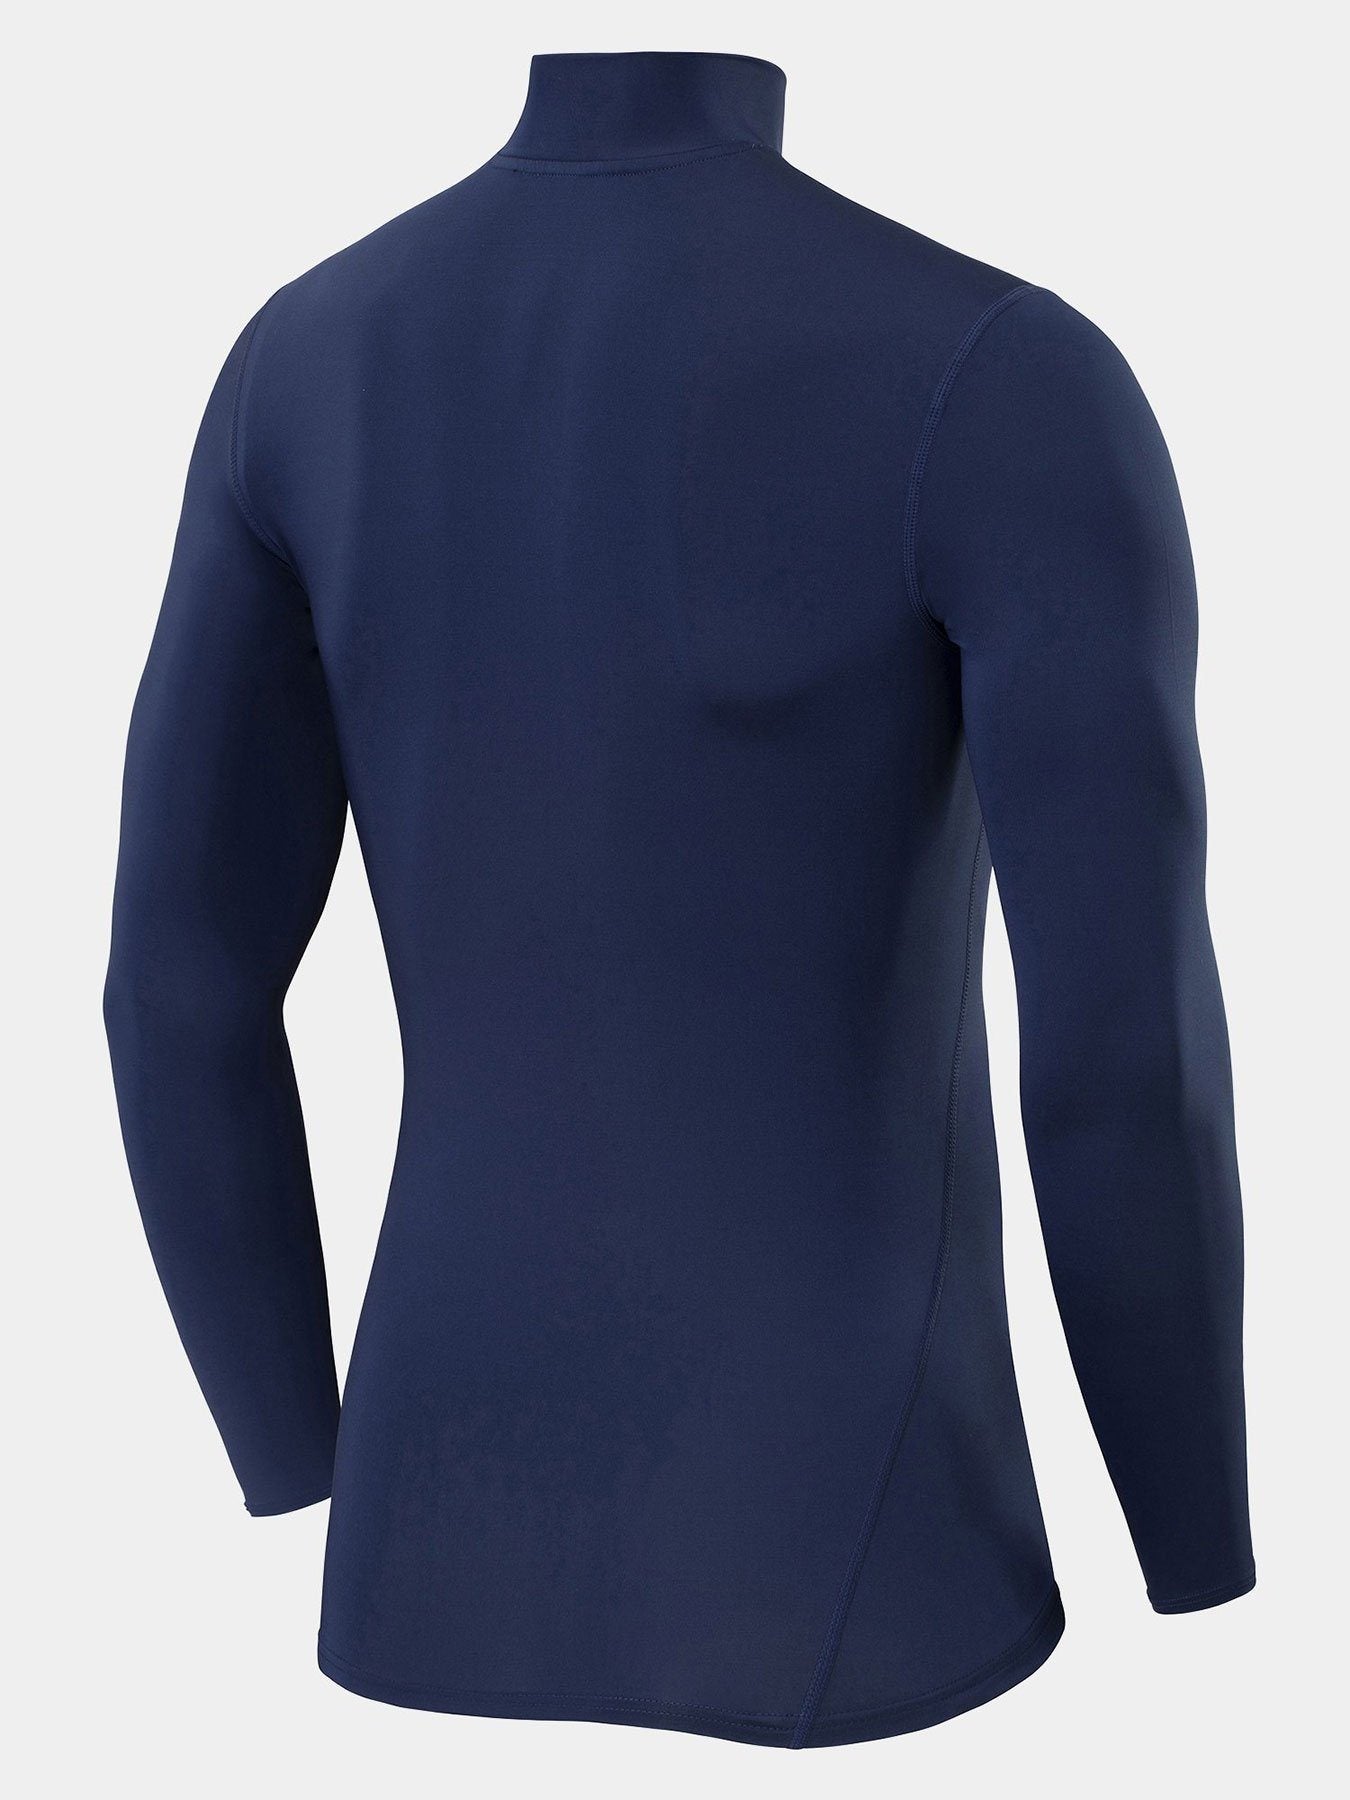 Under Armour ColdGear Compression Base Layer, Mock Long Sleeve